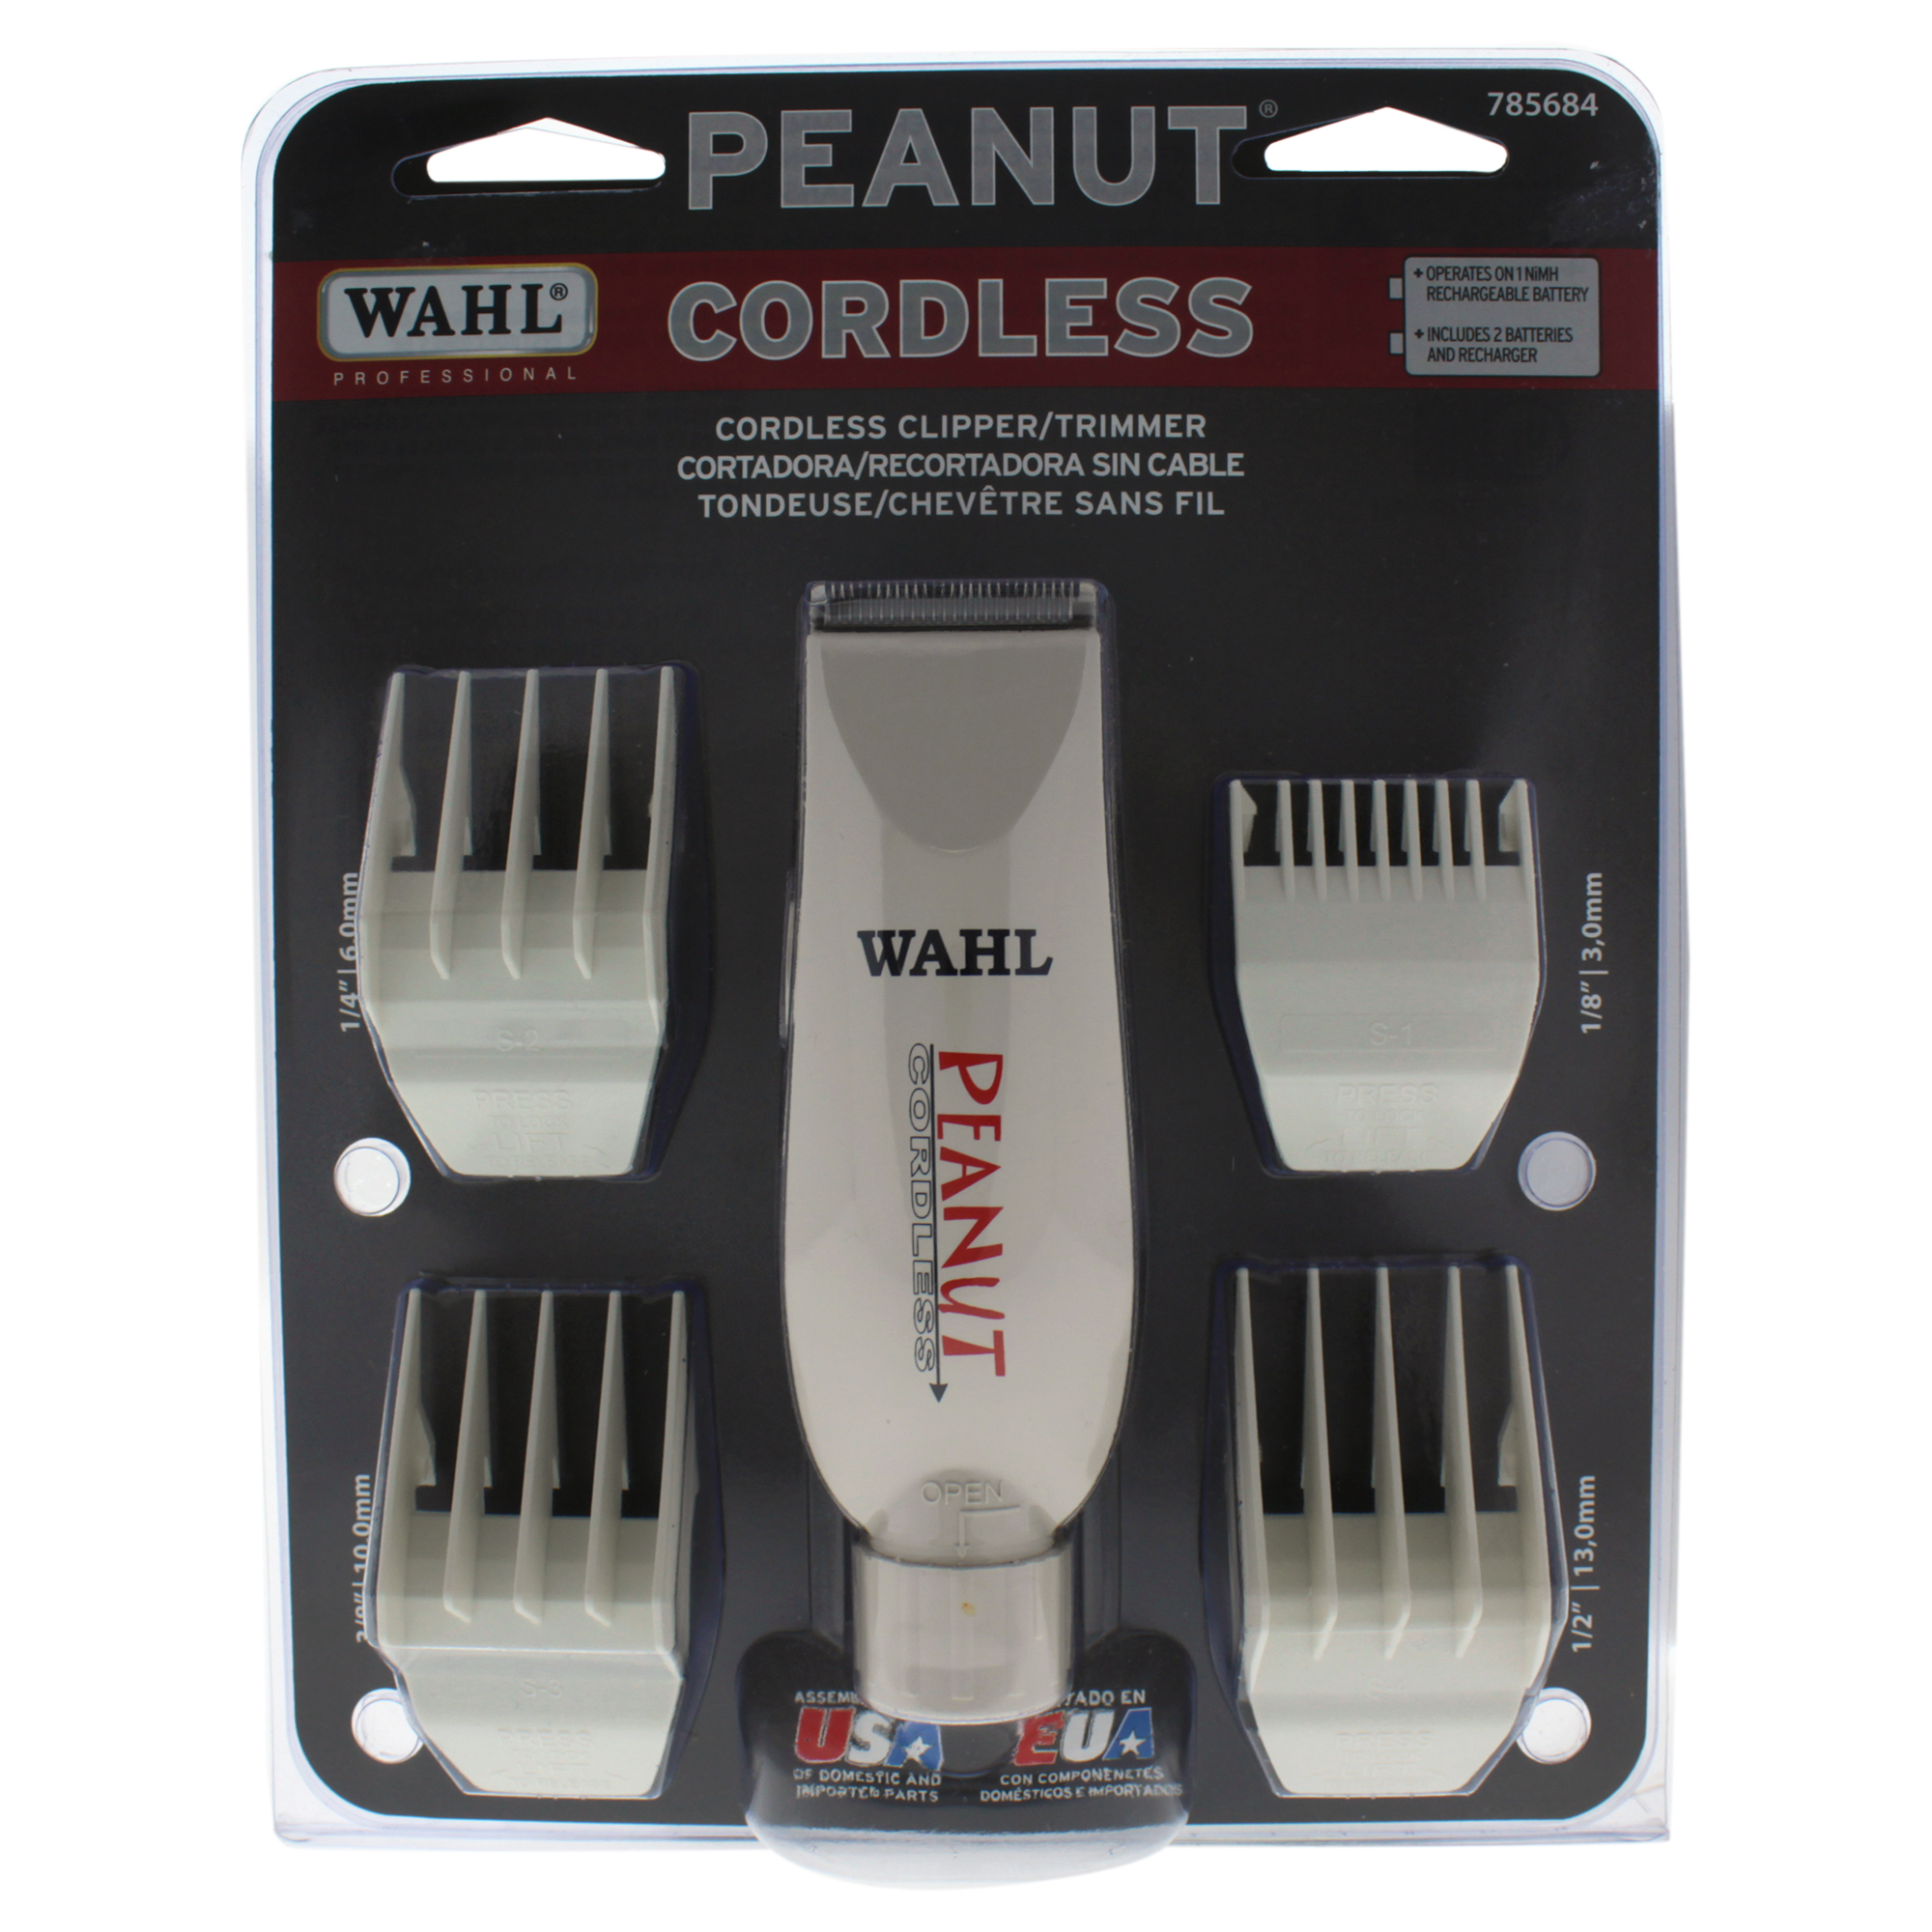 WAHL Professional Cordless Peanut Trimmer Model 8663 White Pc Kit  Trimmer